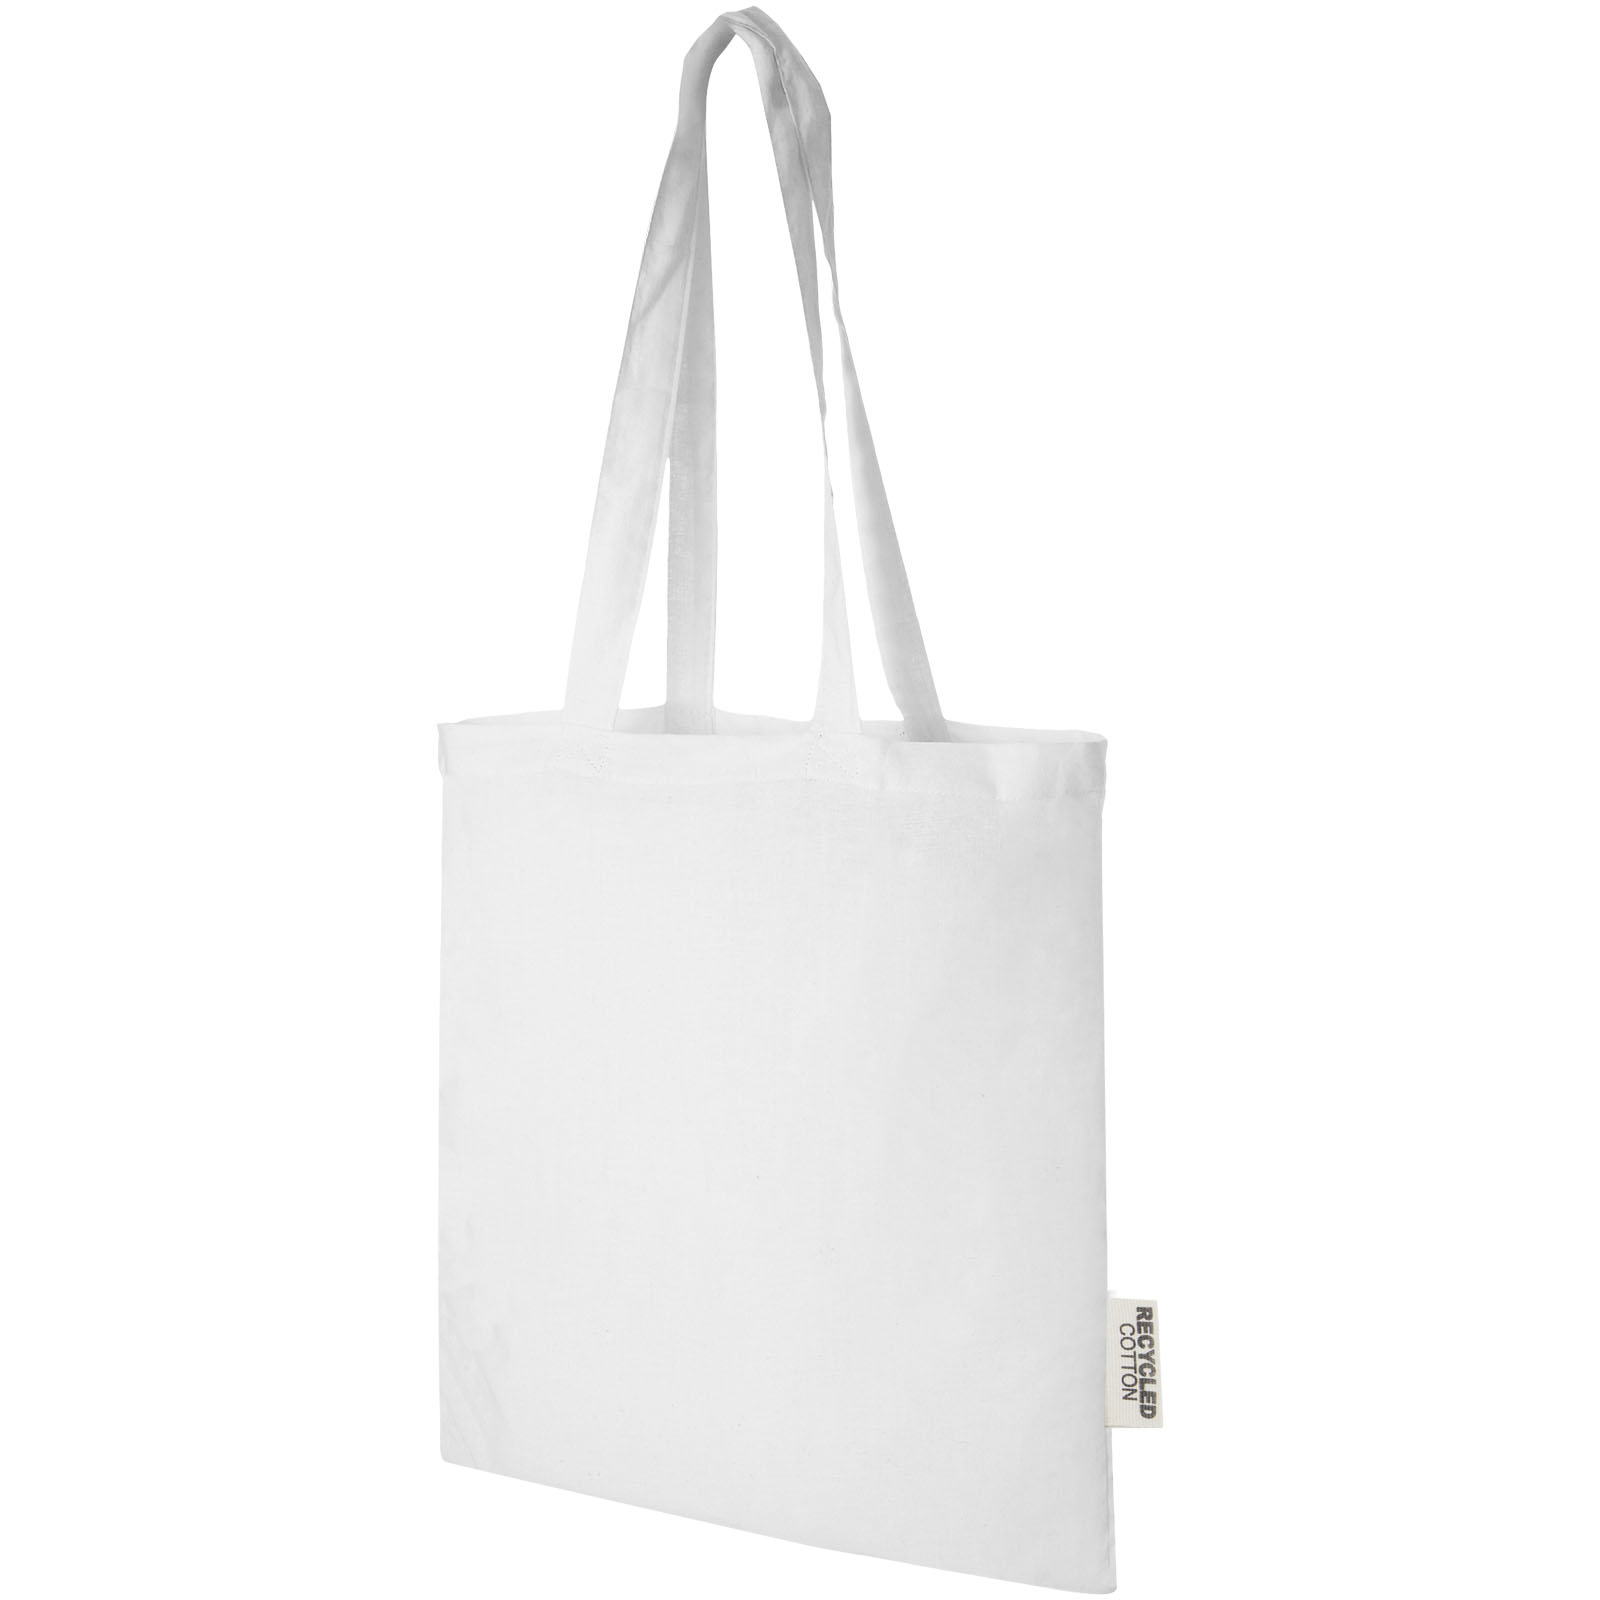 Bags - Madras 140 g/m2 GRS recycled cotton tote bag 7L